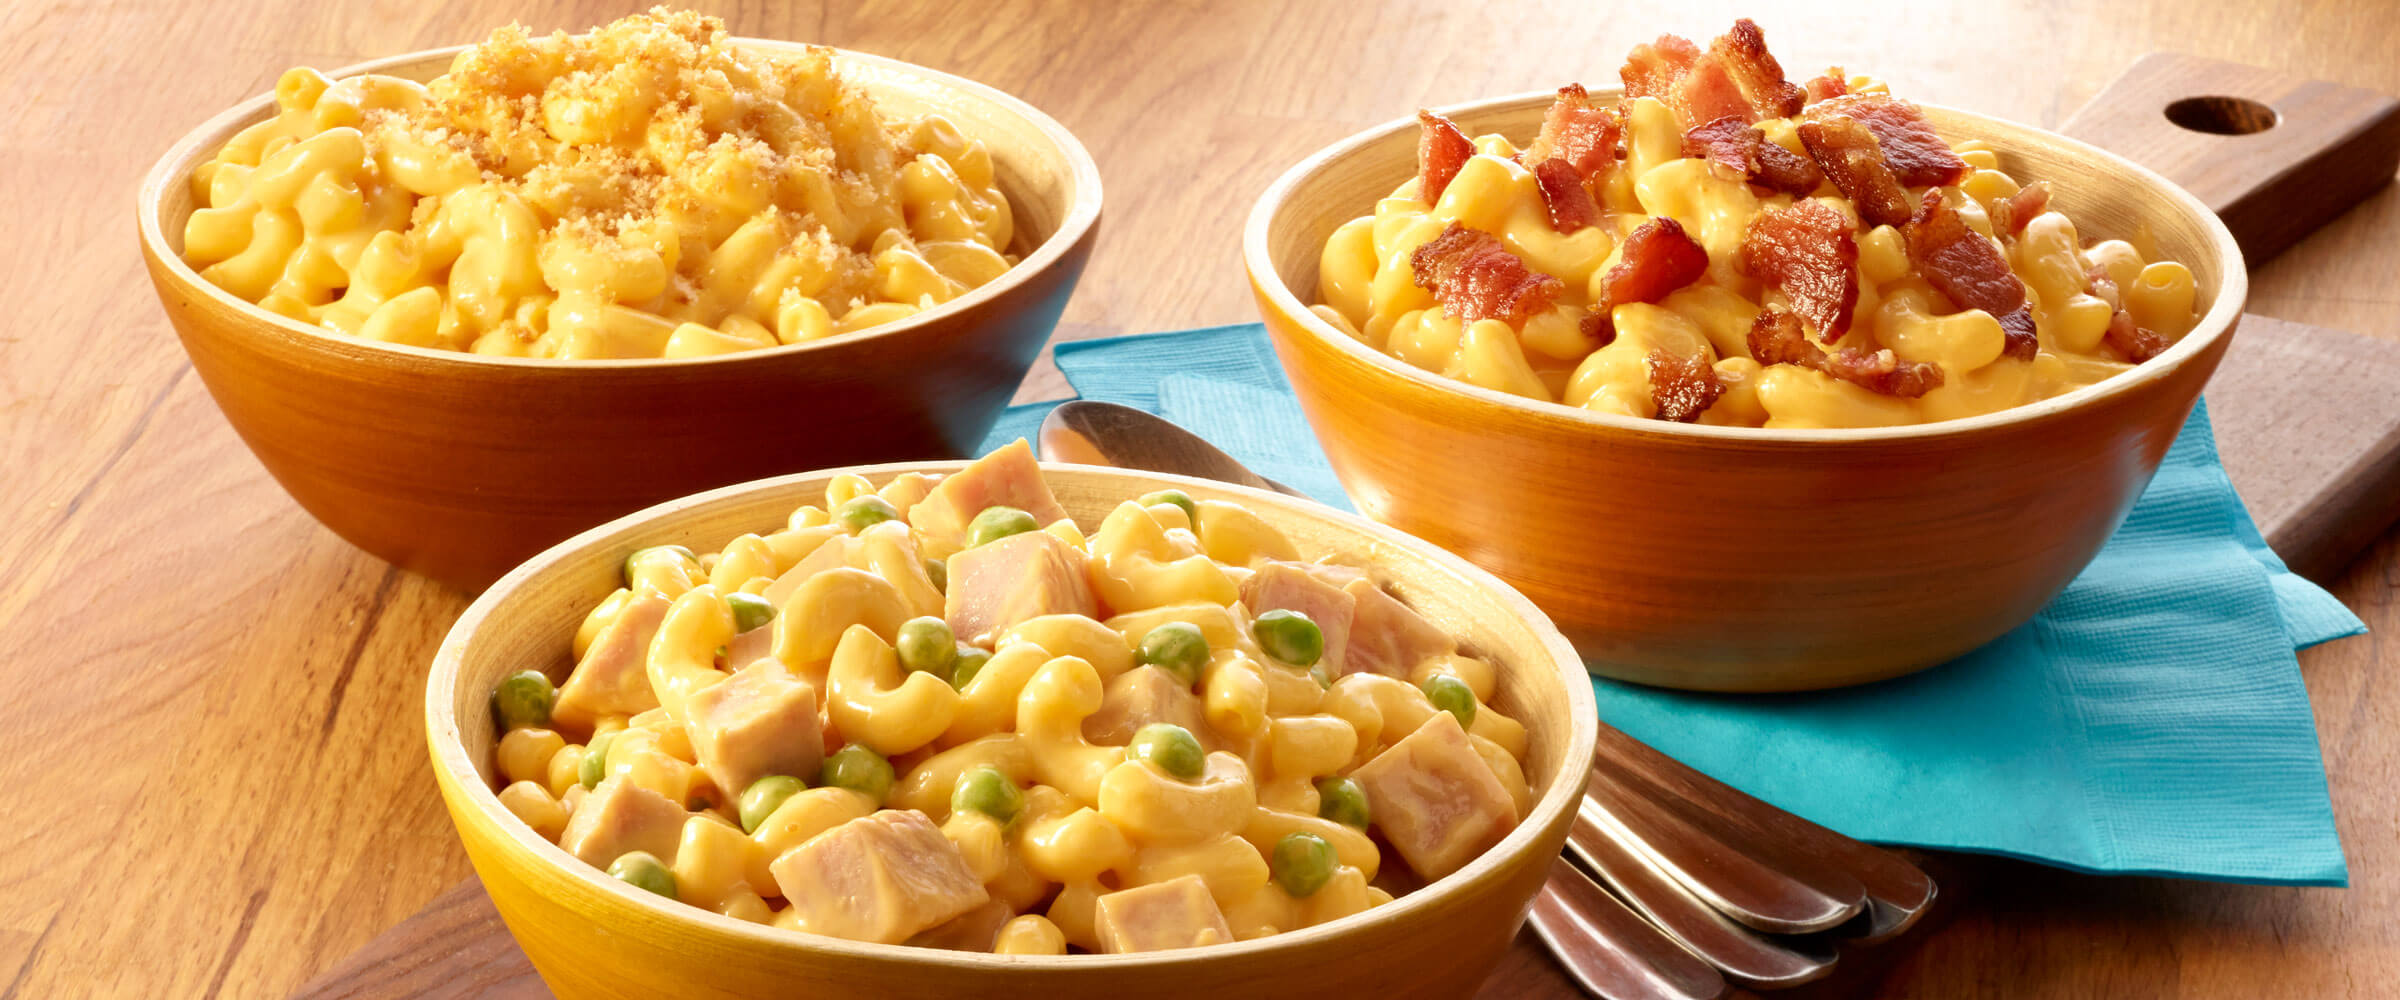 Macaroni and Cheese 3 ways with bacon, breadcrumbs, ham and peas with blue napkin